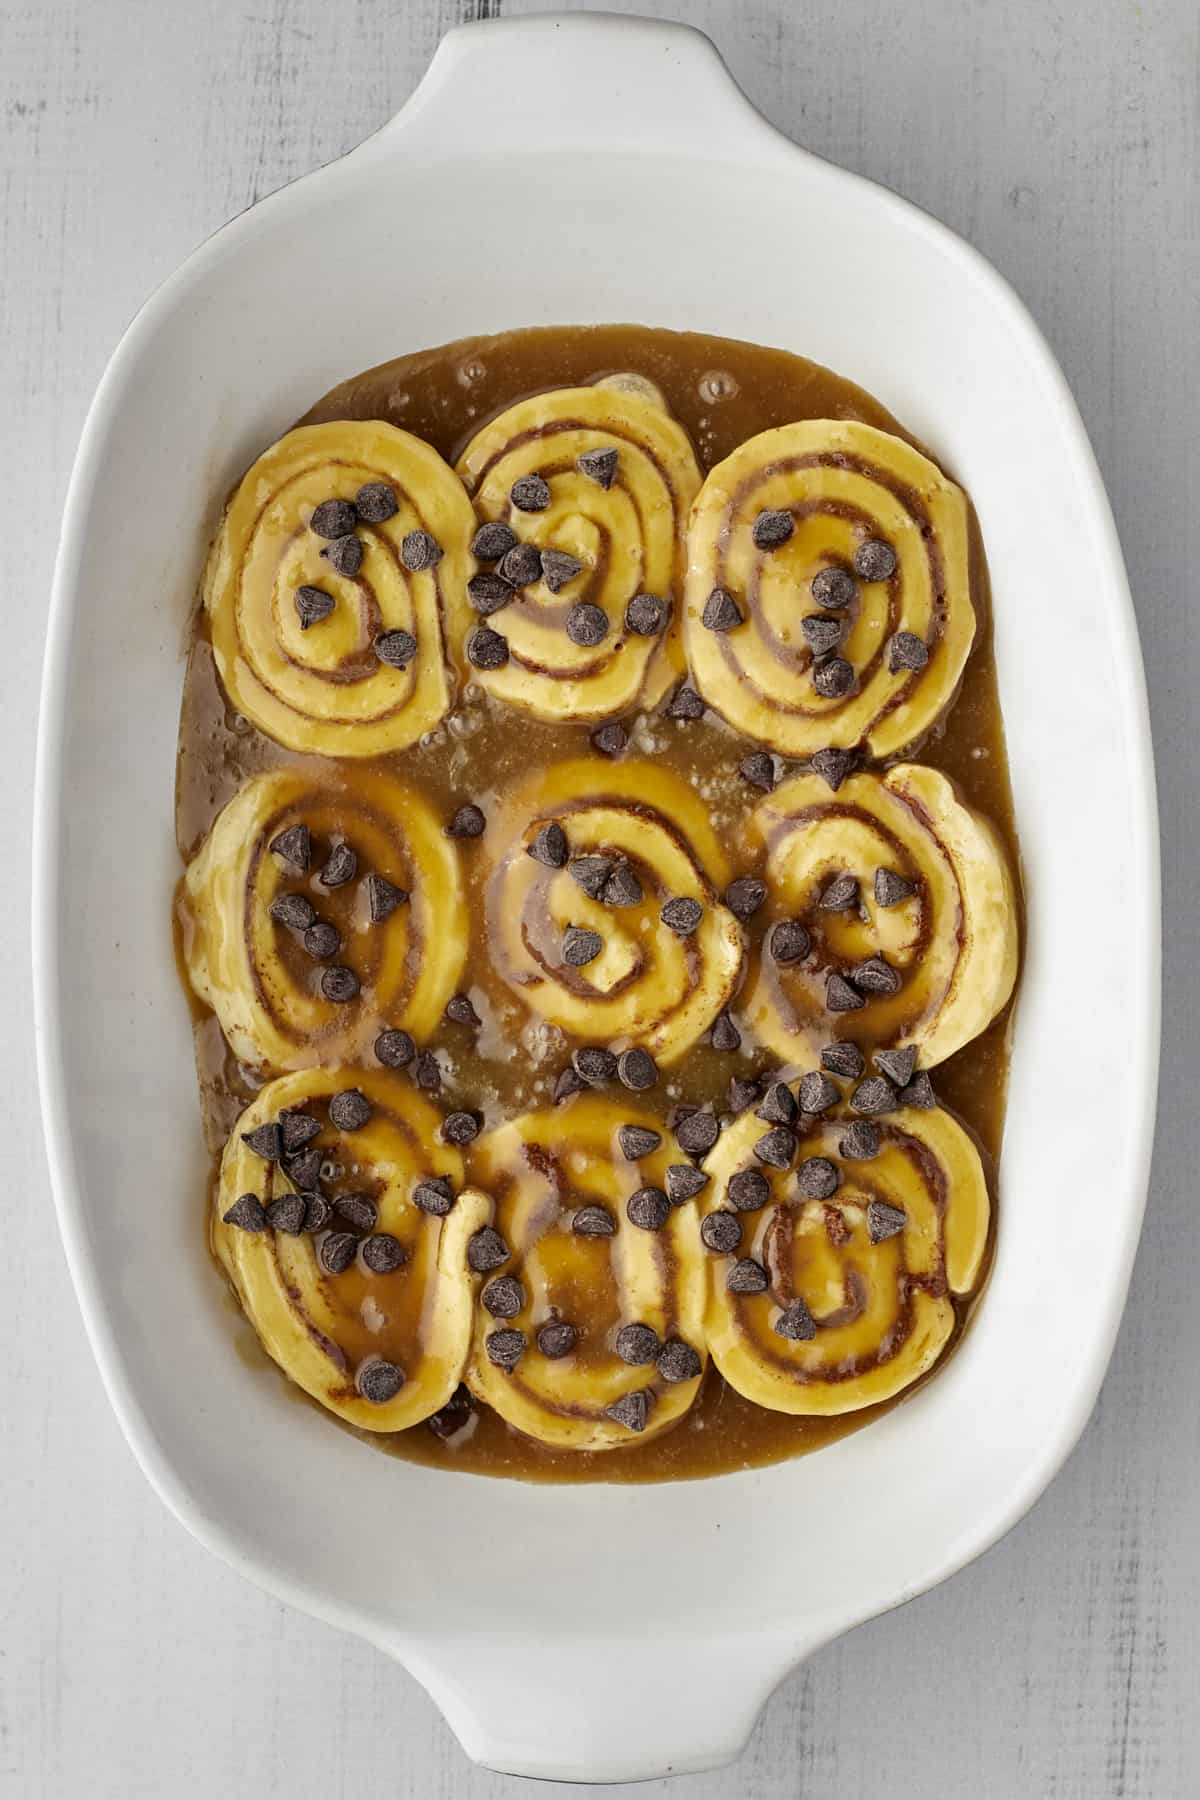 unbaked cinnamon rolls layered between caramel sauce topped with chocolate chips in a white baking dish